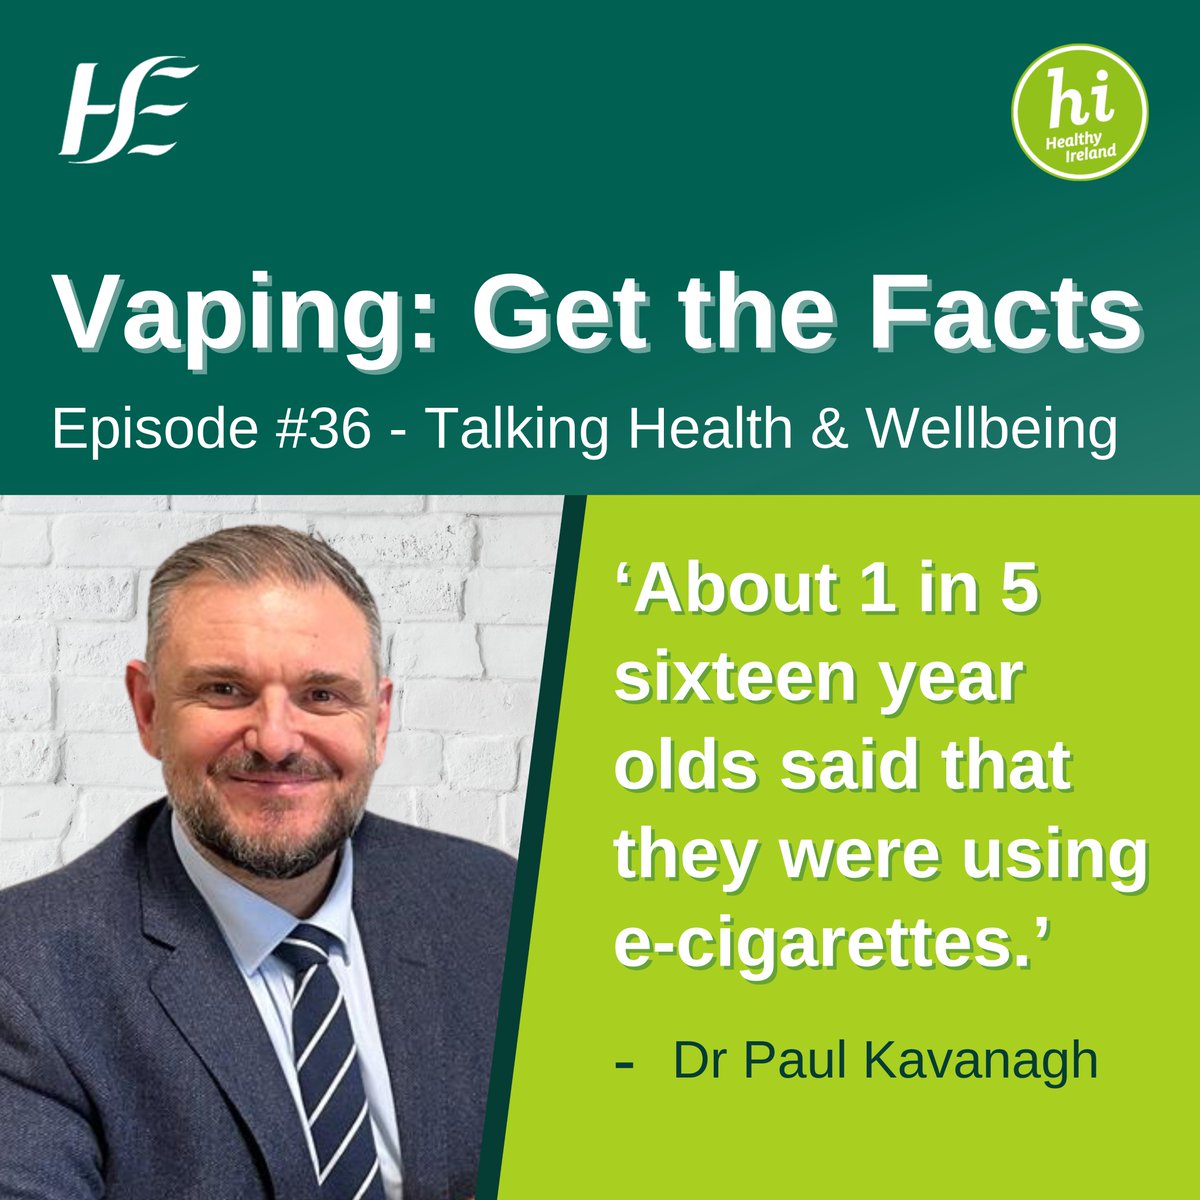 Have a listen to our latest #podcast as we focus on #Vaping and highlight some facts on the issue: hsepodcasts.podbean.com/e/36-vaping-ge… You can access some of our free information resources on this issue in the podcast information section. #TalkingHealthandWellbeing